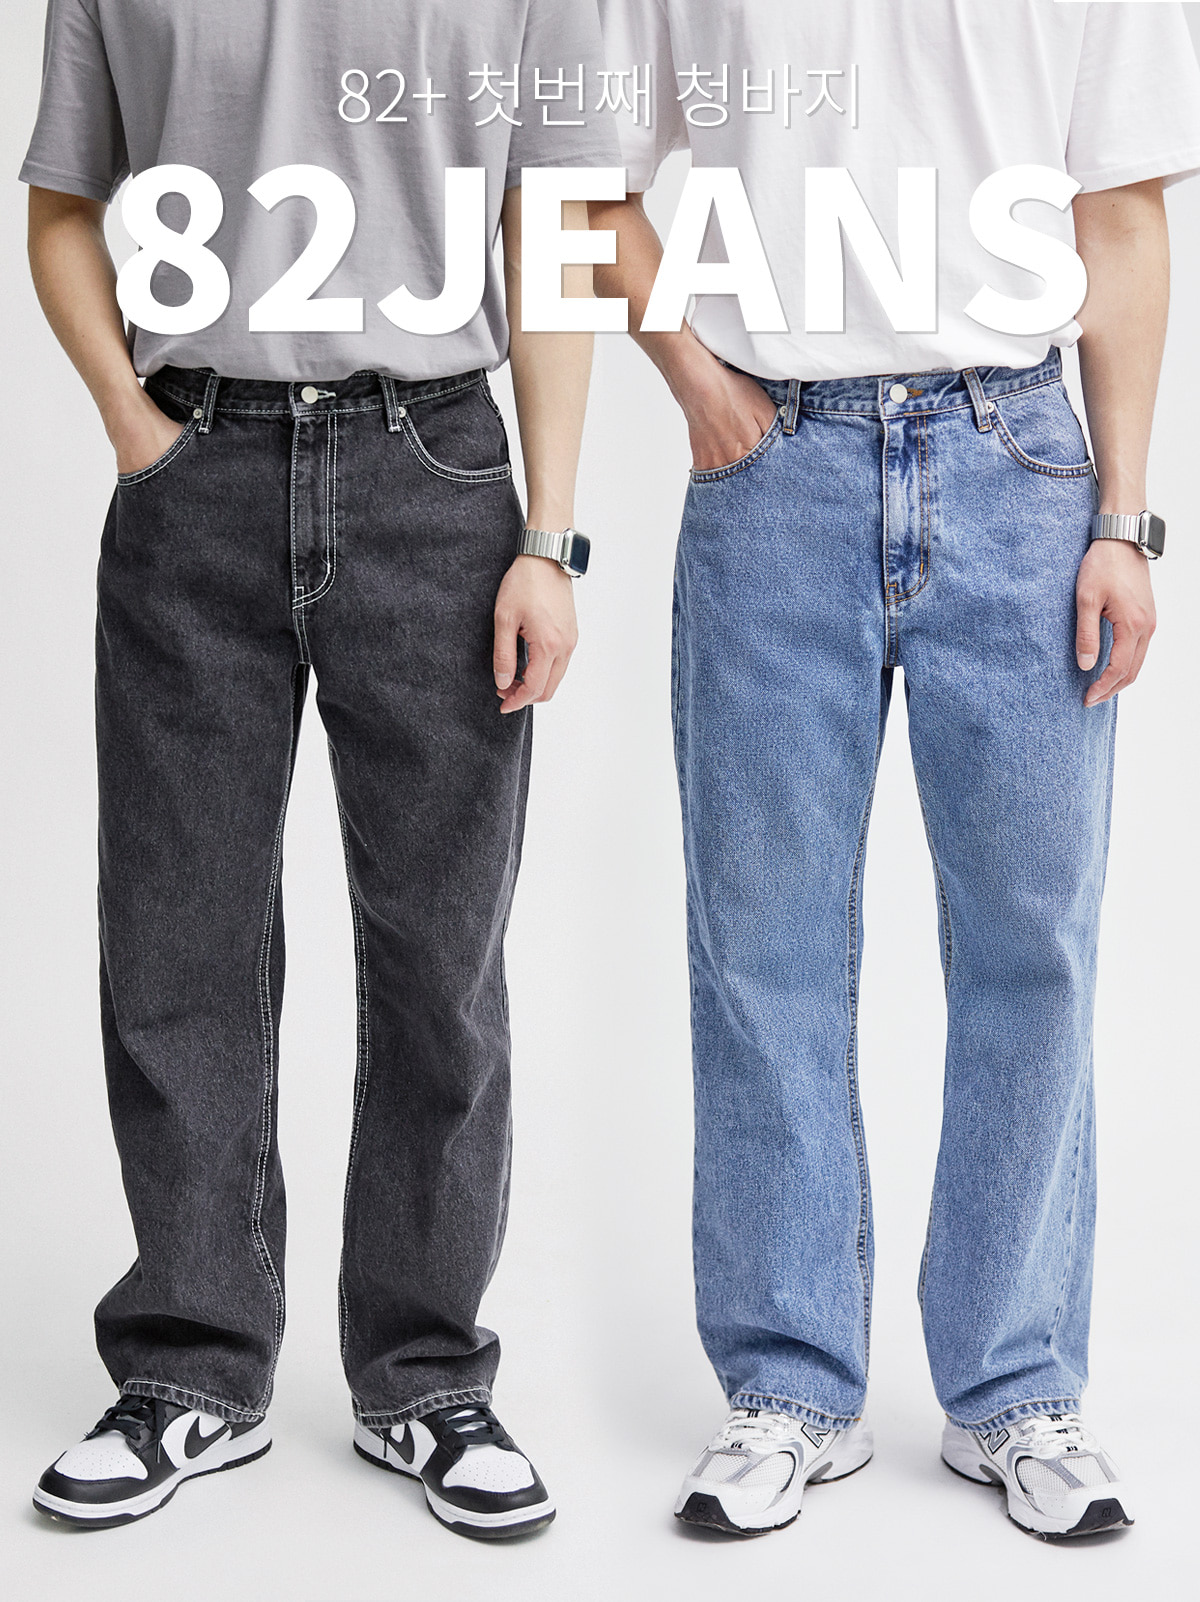 82JEANS